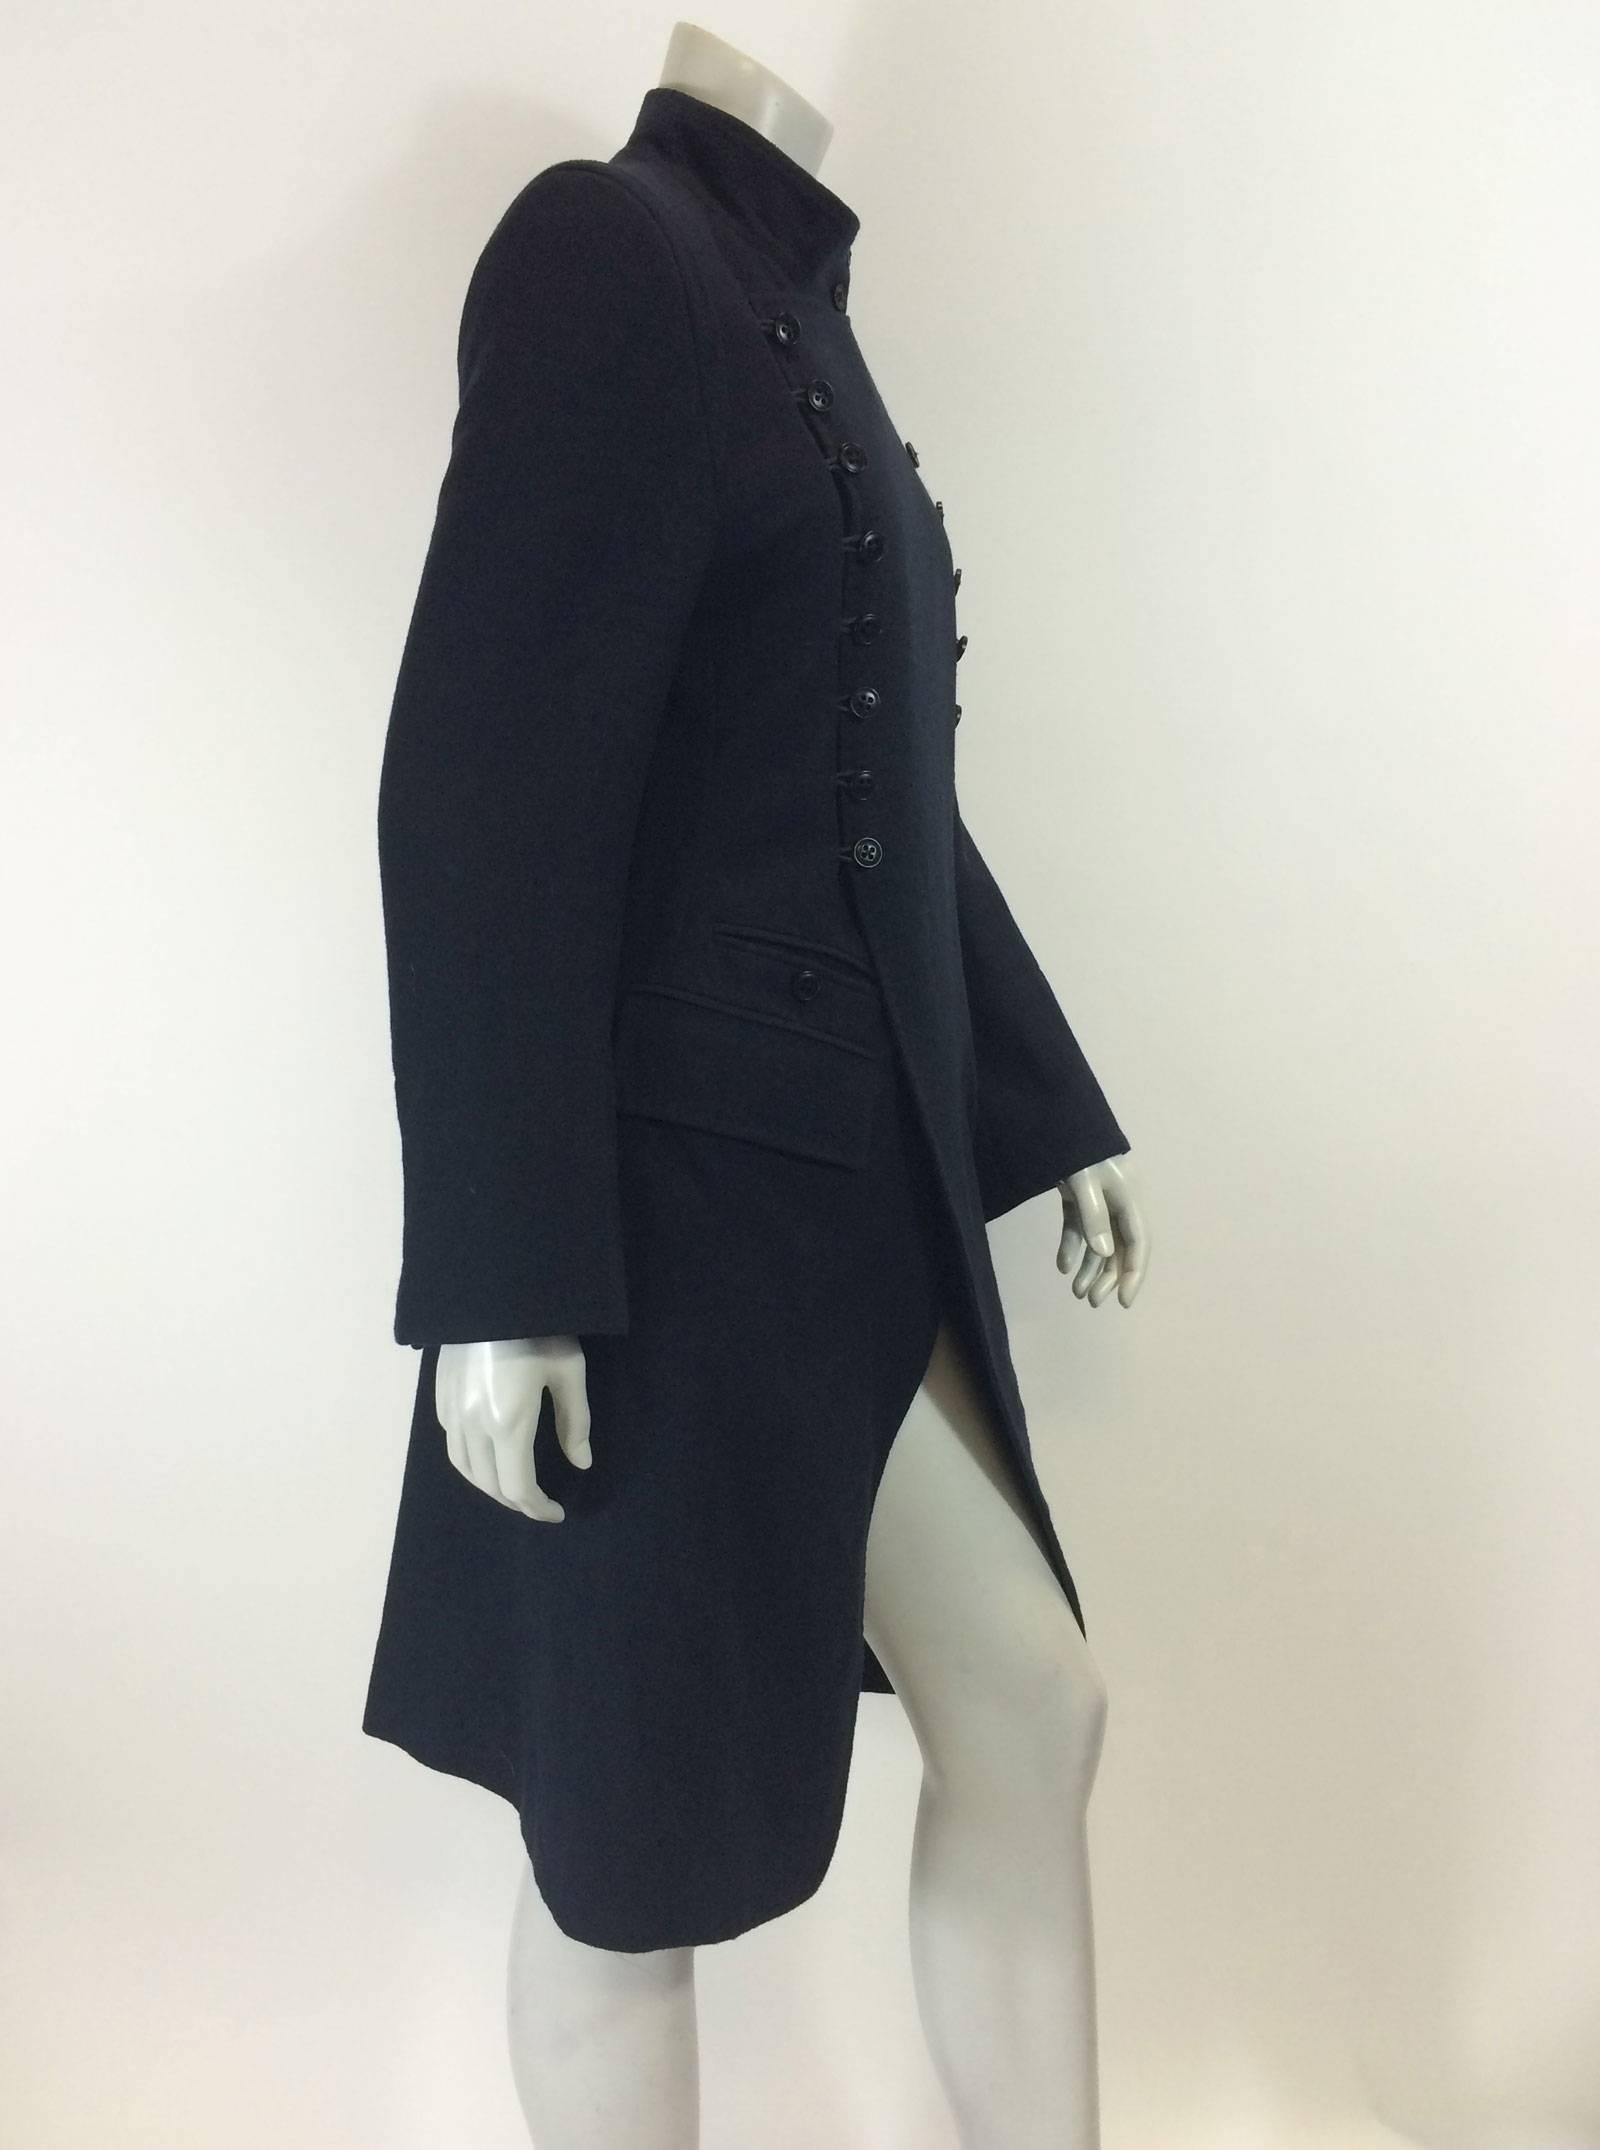 Impeccably designed Ann Demeulemeester coat.
Military inspired.
Dark navy blue (almost black) cotton/wool/cashmere blend.
HIgh neck with button closure.
Double breasted, can button left or right. 
Two rows of buttons, button holes and elastic